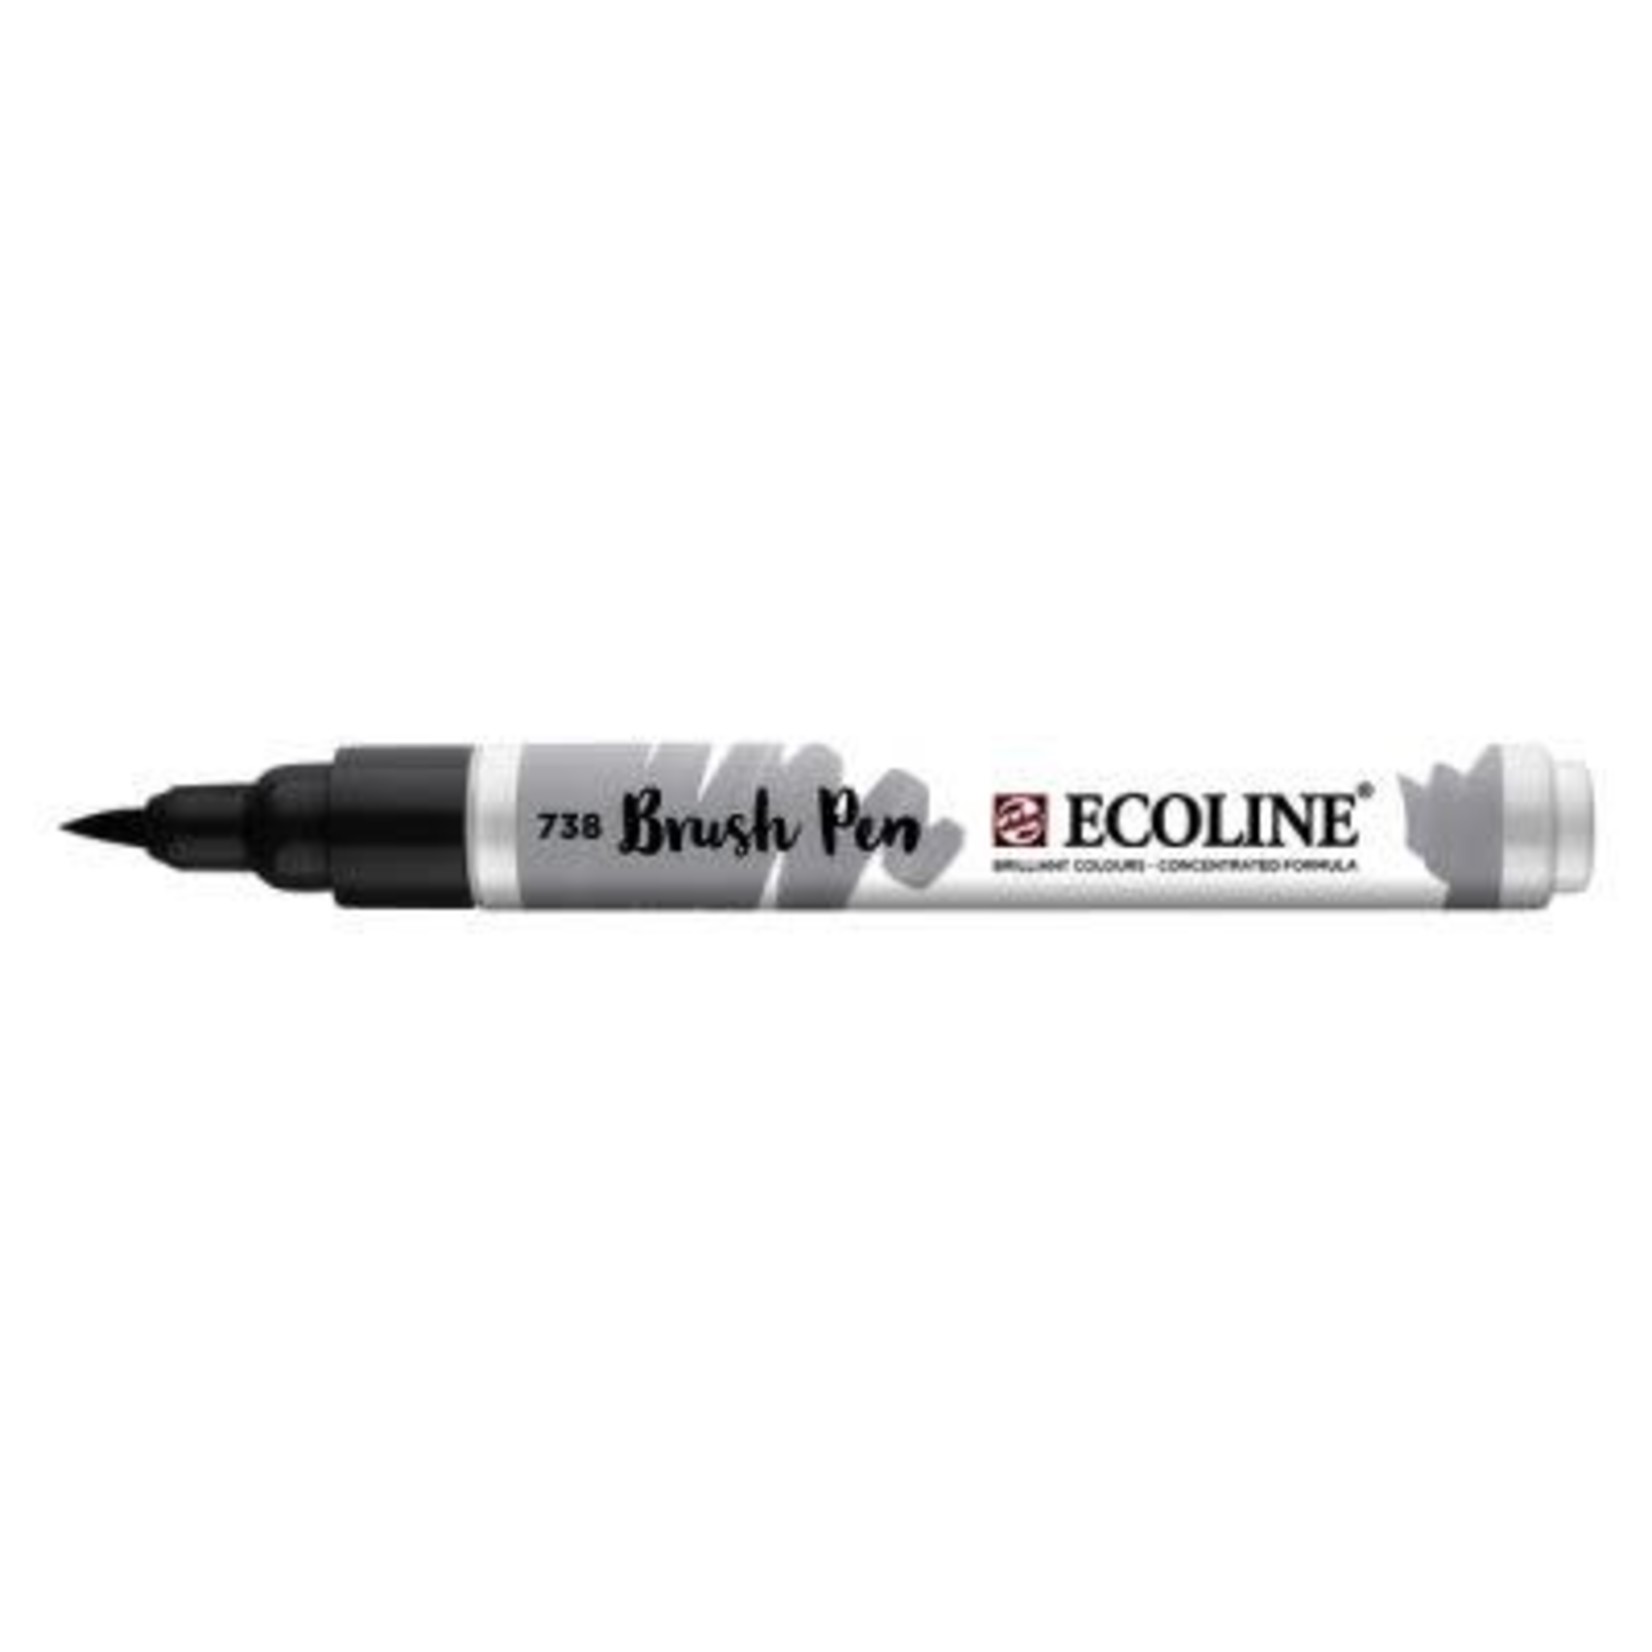 ROYAL TALENS NORTH AMERIC Brush Pen "Ecoline" waterverf - Cold Grey Light n° 738